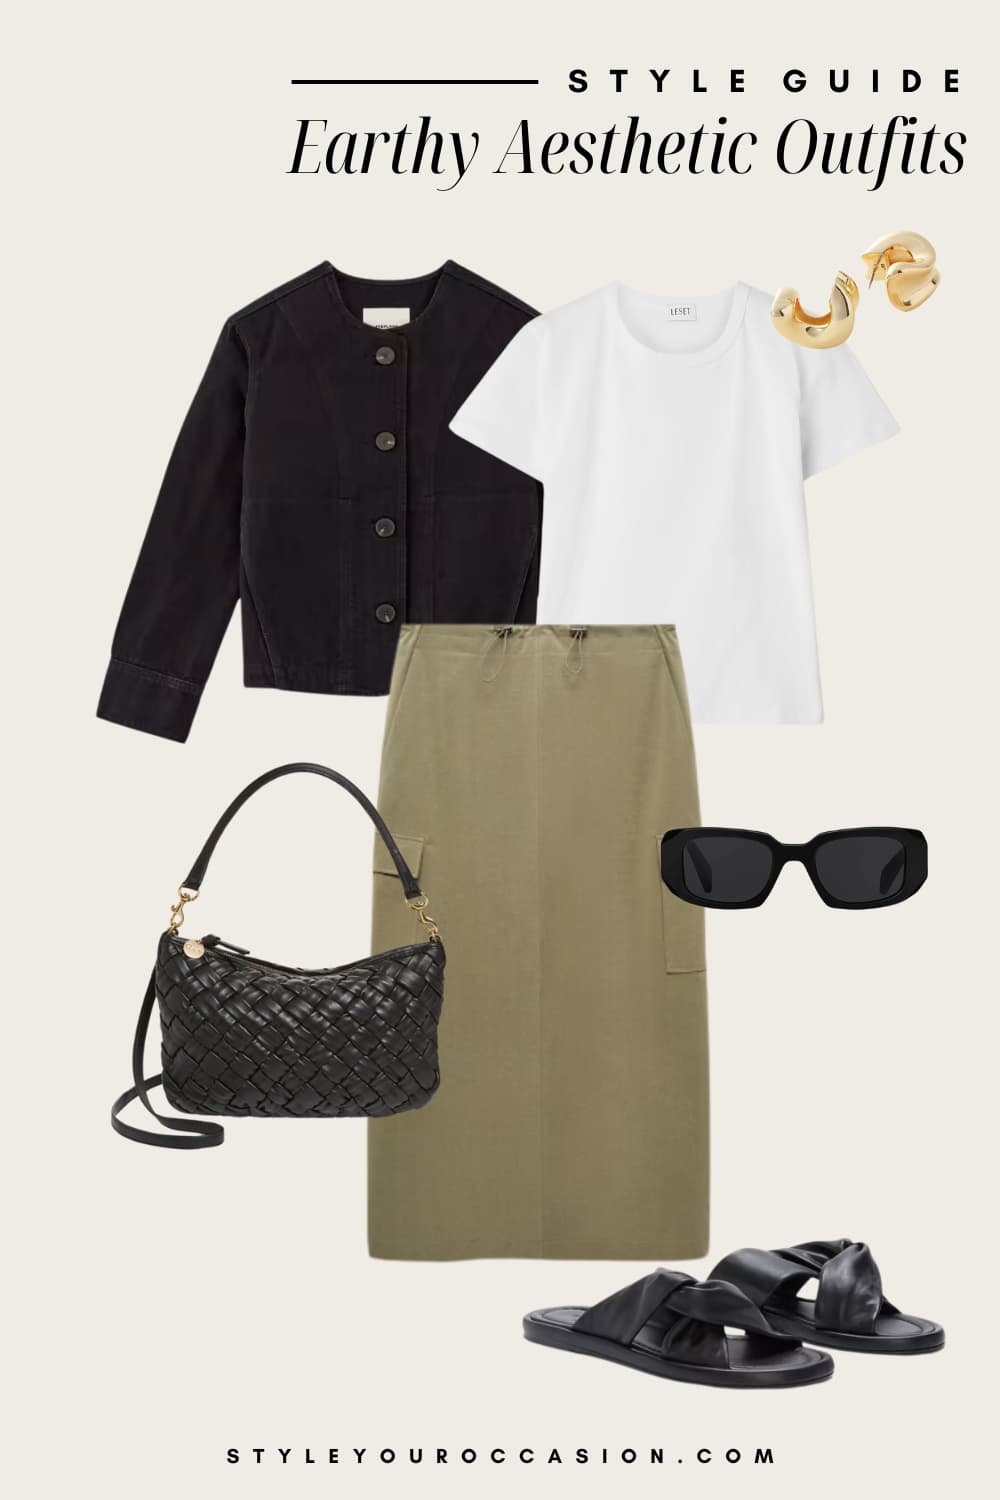 Flat lay outfit graphic of a cargo skirt, white t-shirt, a black cardigan and black accessories.